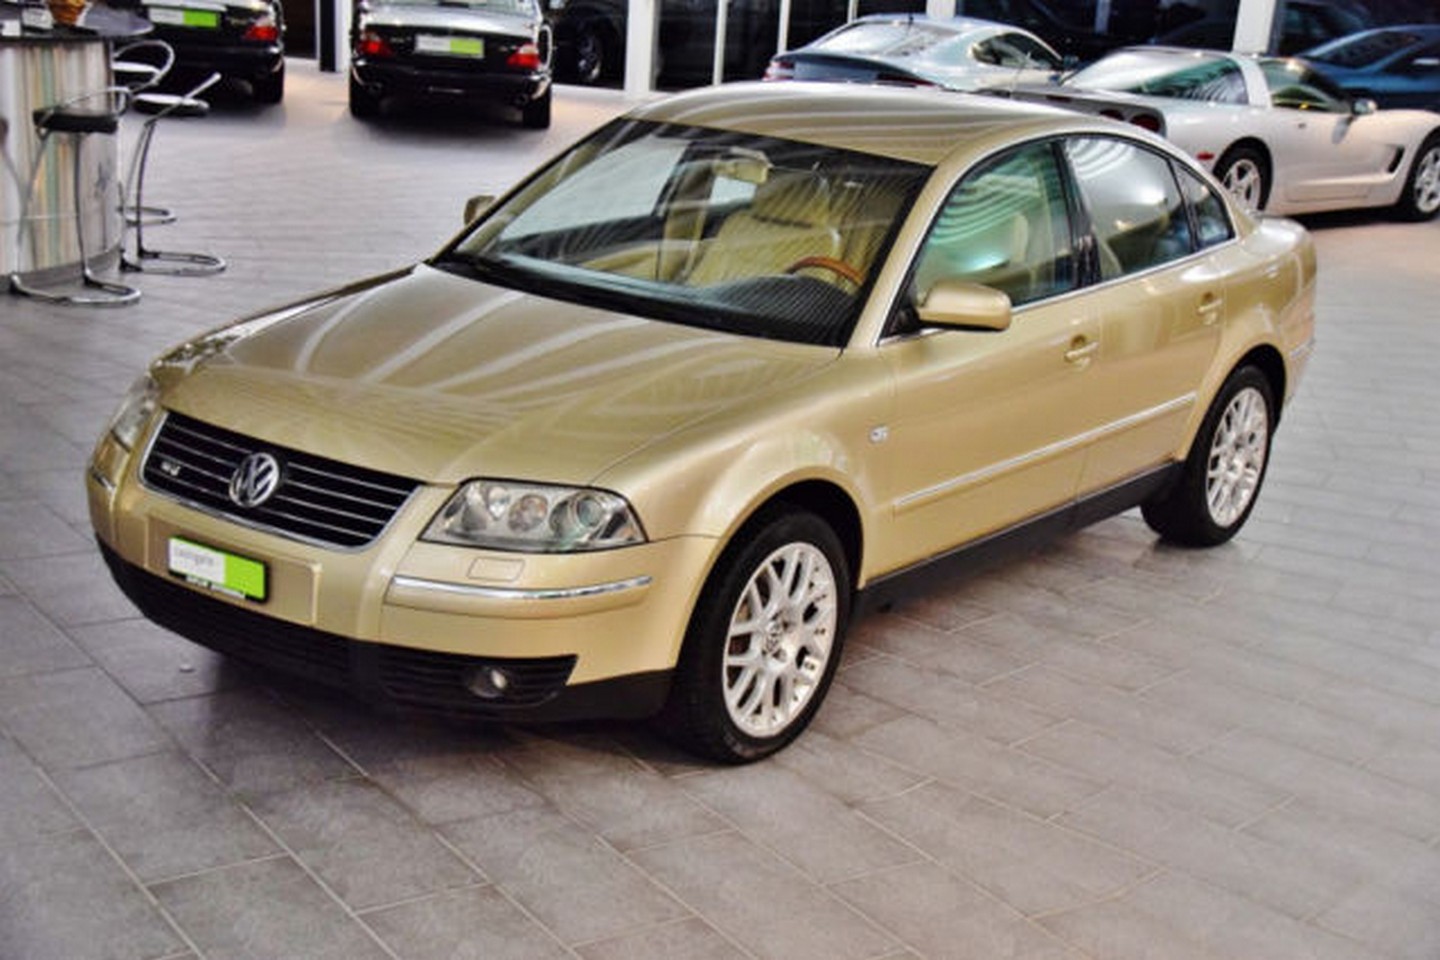 Would You Pay €16,800 For A VW Passat B5 With A W8 Engine?